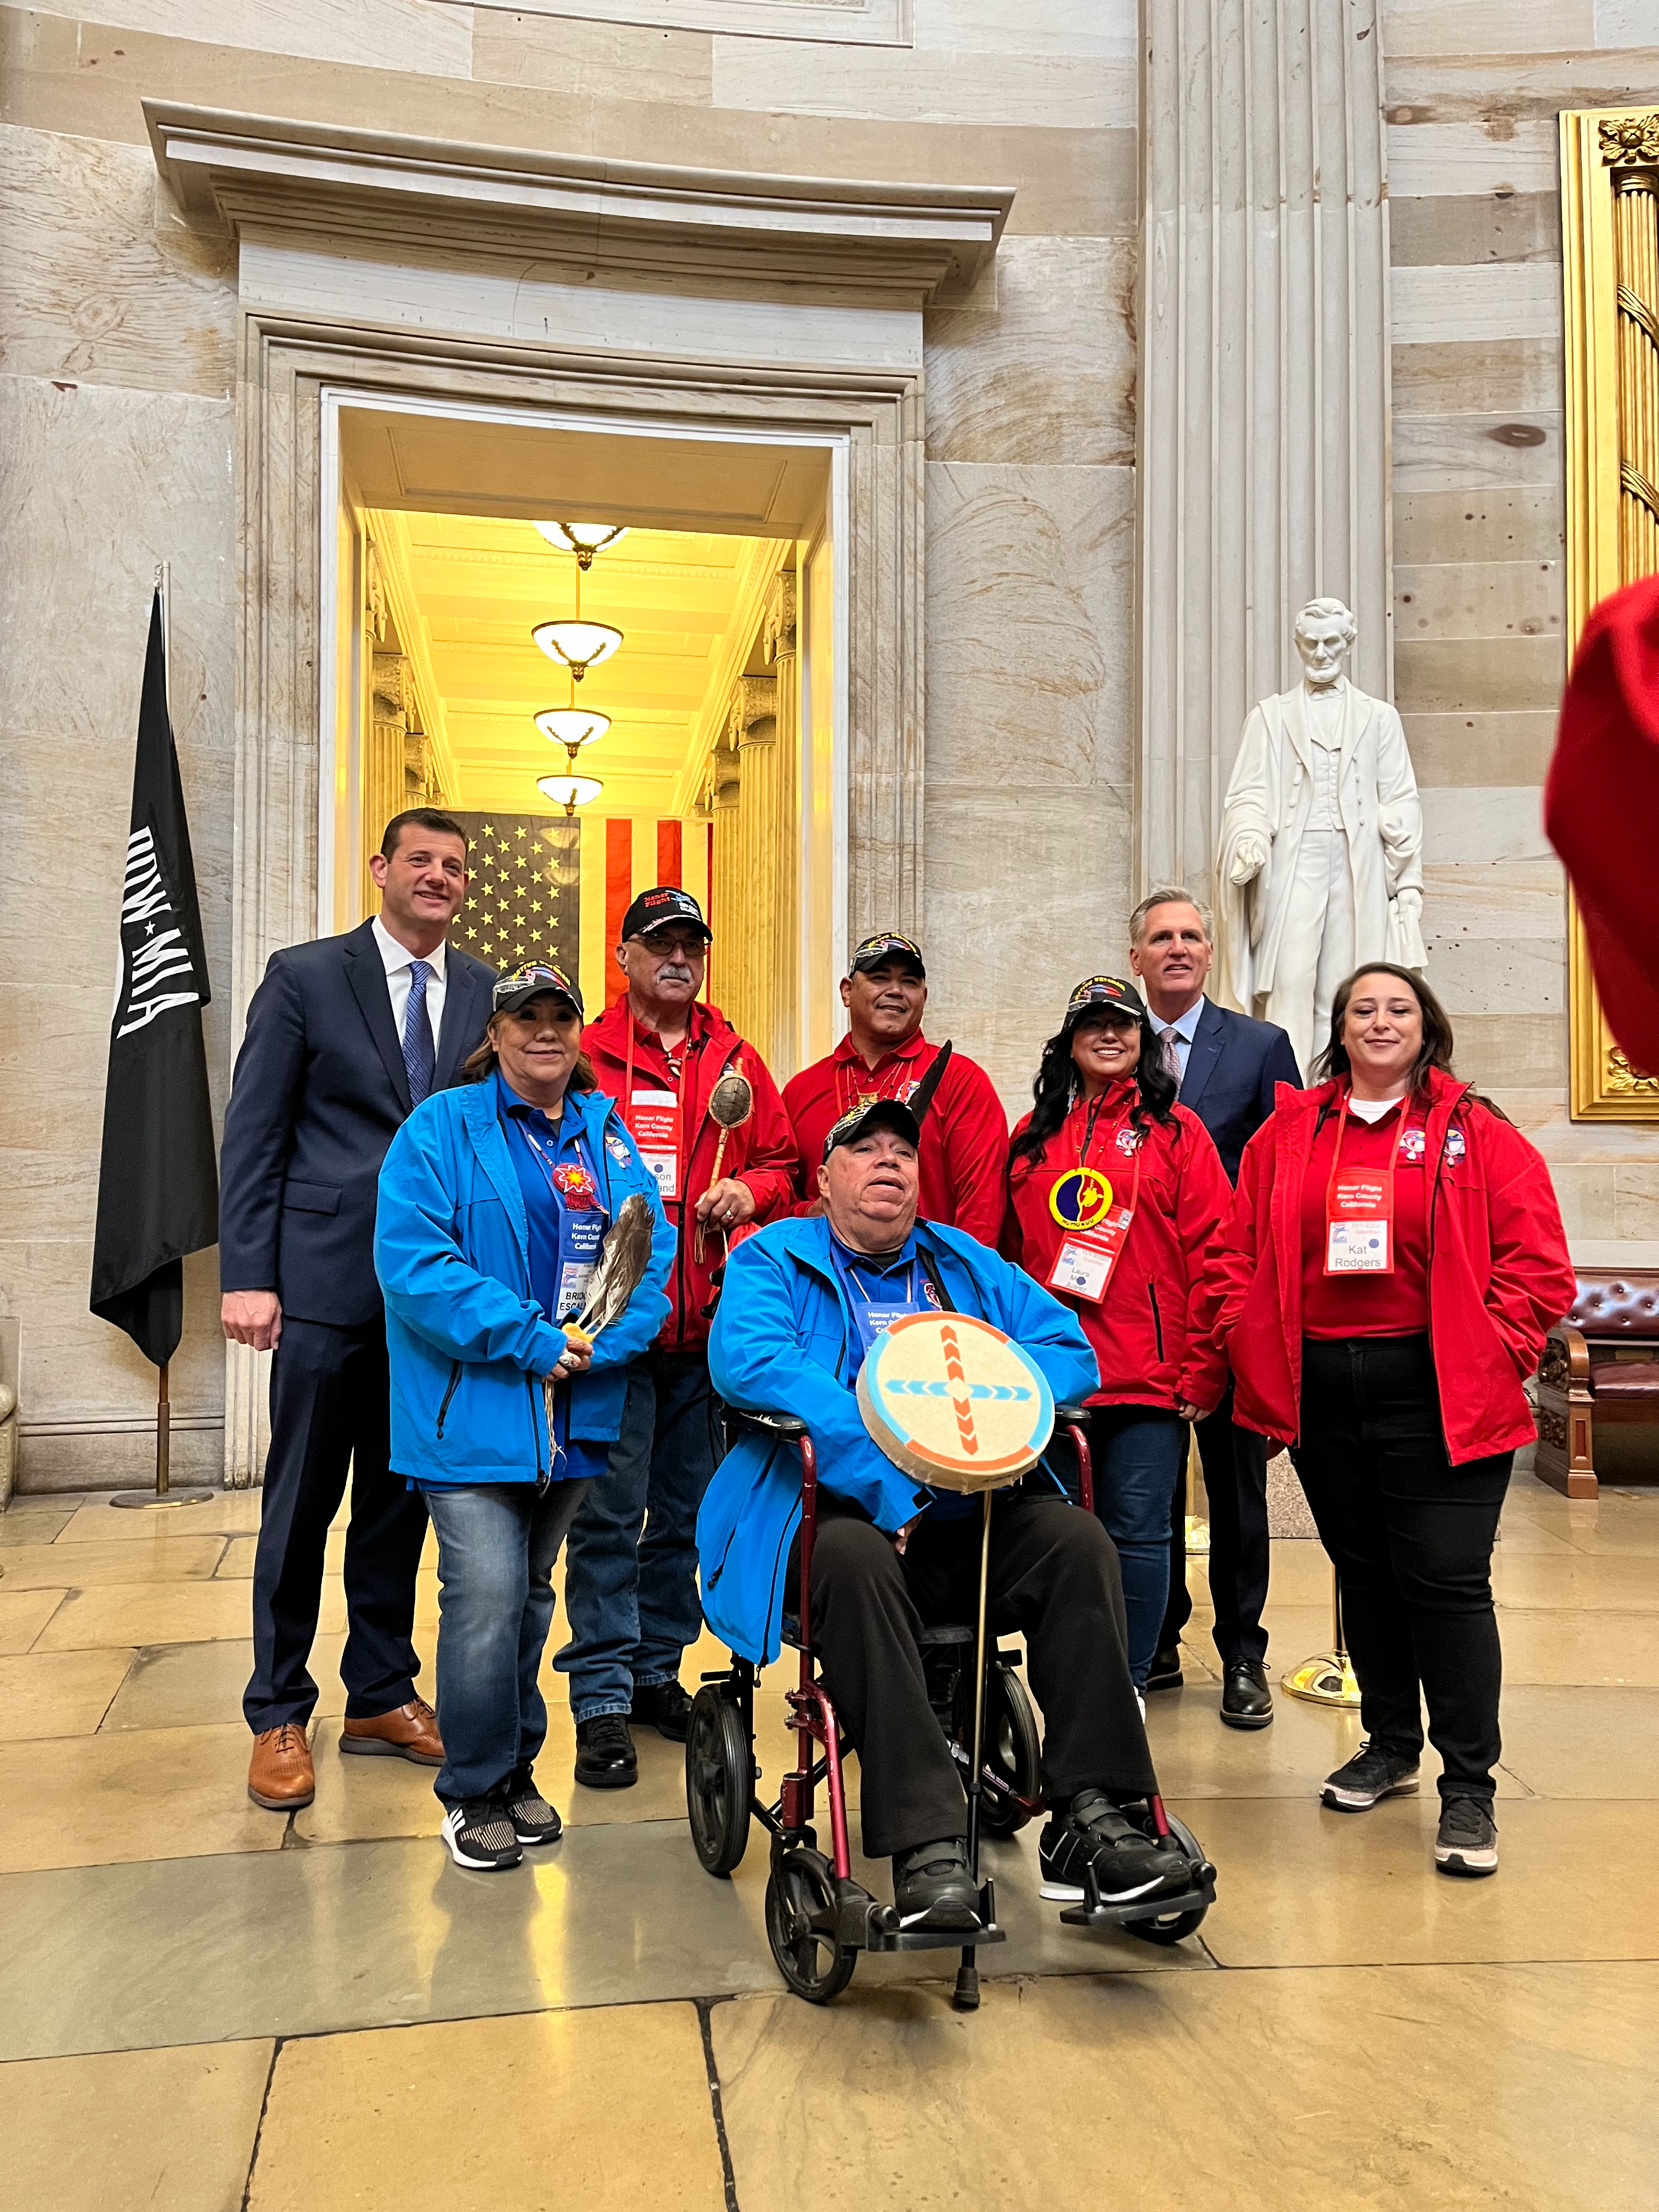 Rep. Valadao welcomes veterans to the Capitol